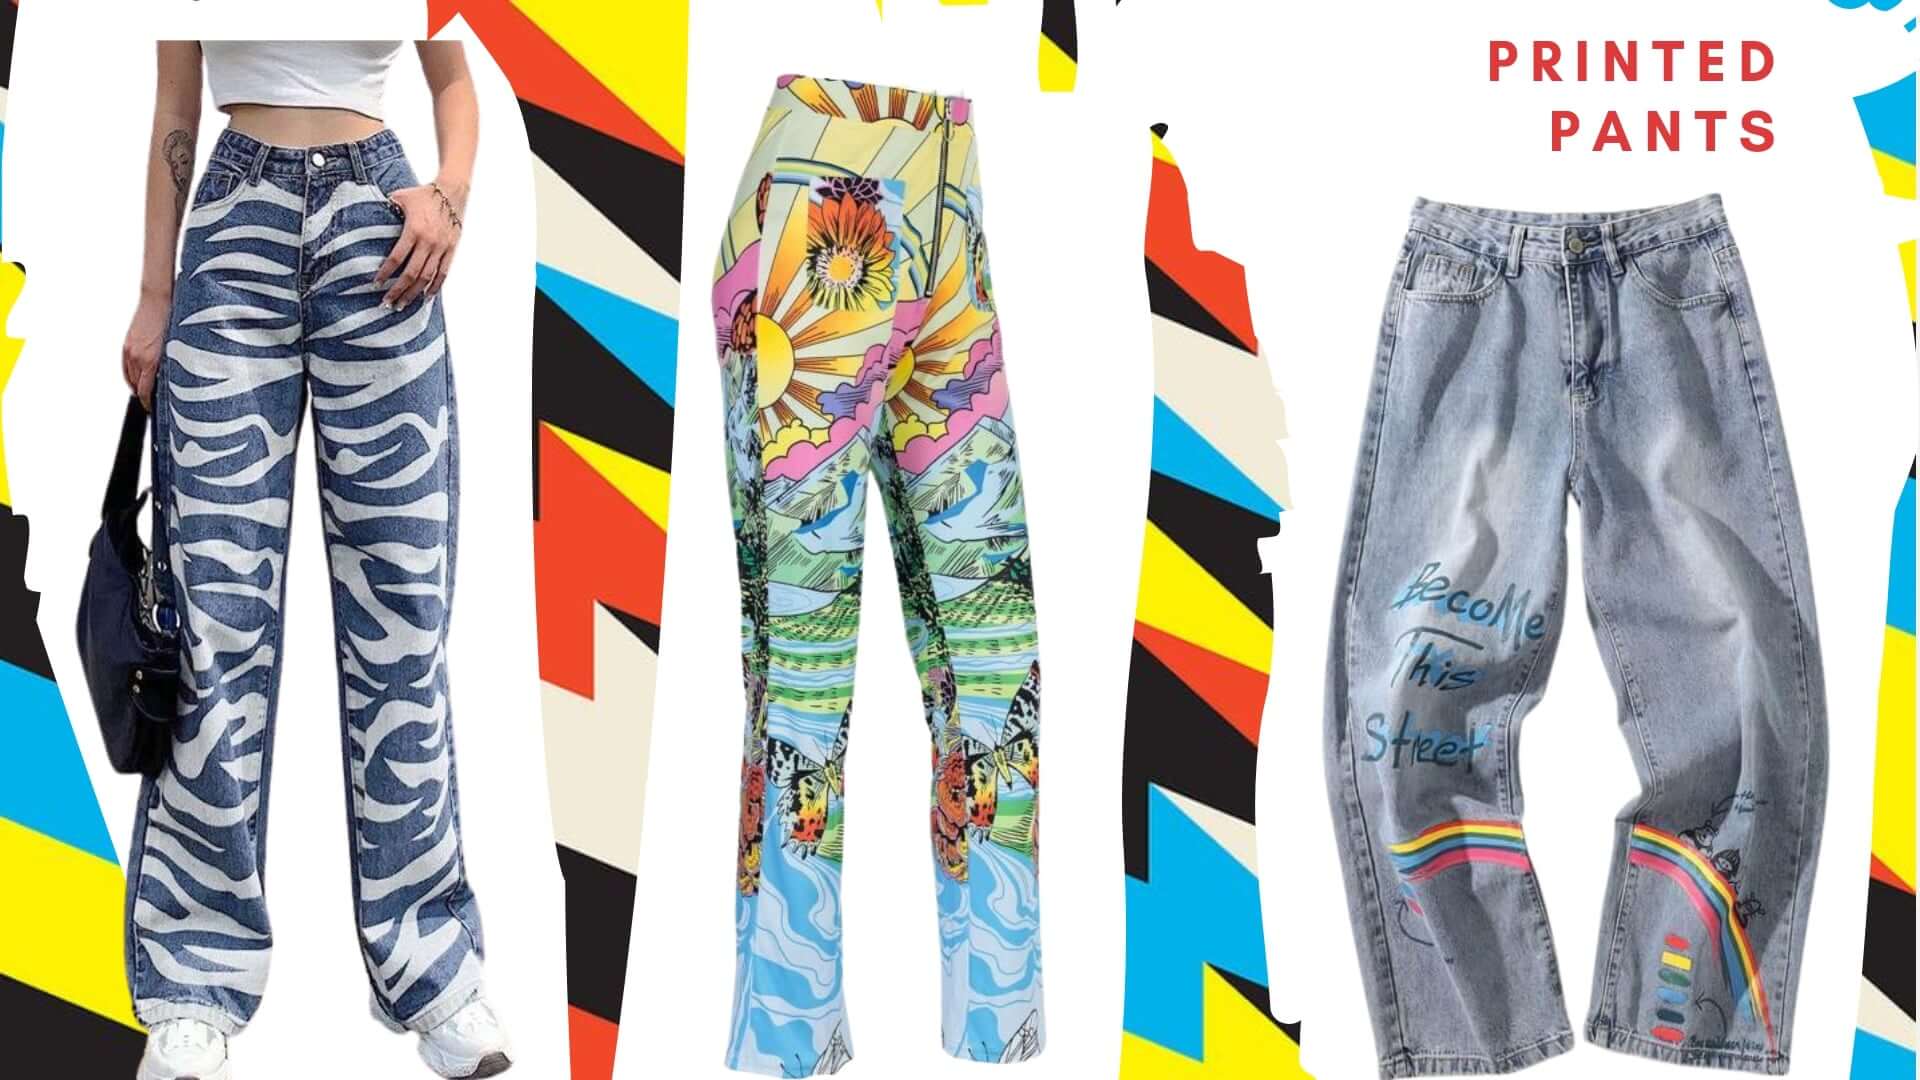 11 fall 2021 trends for you - printed pants